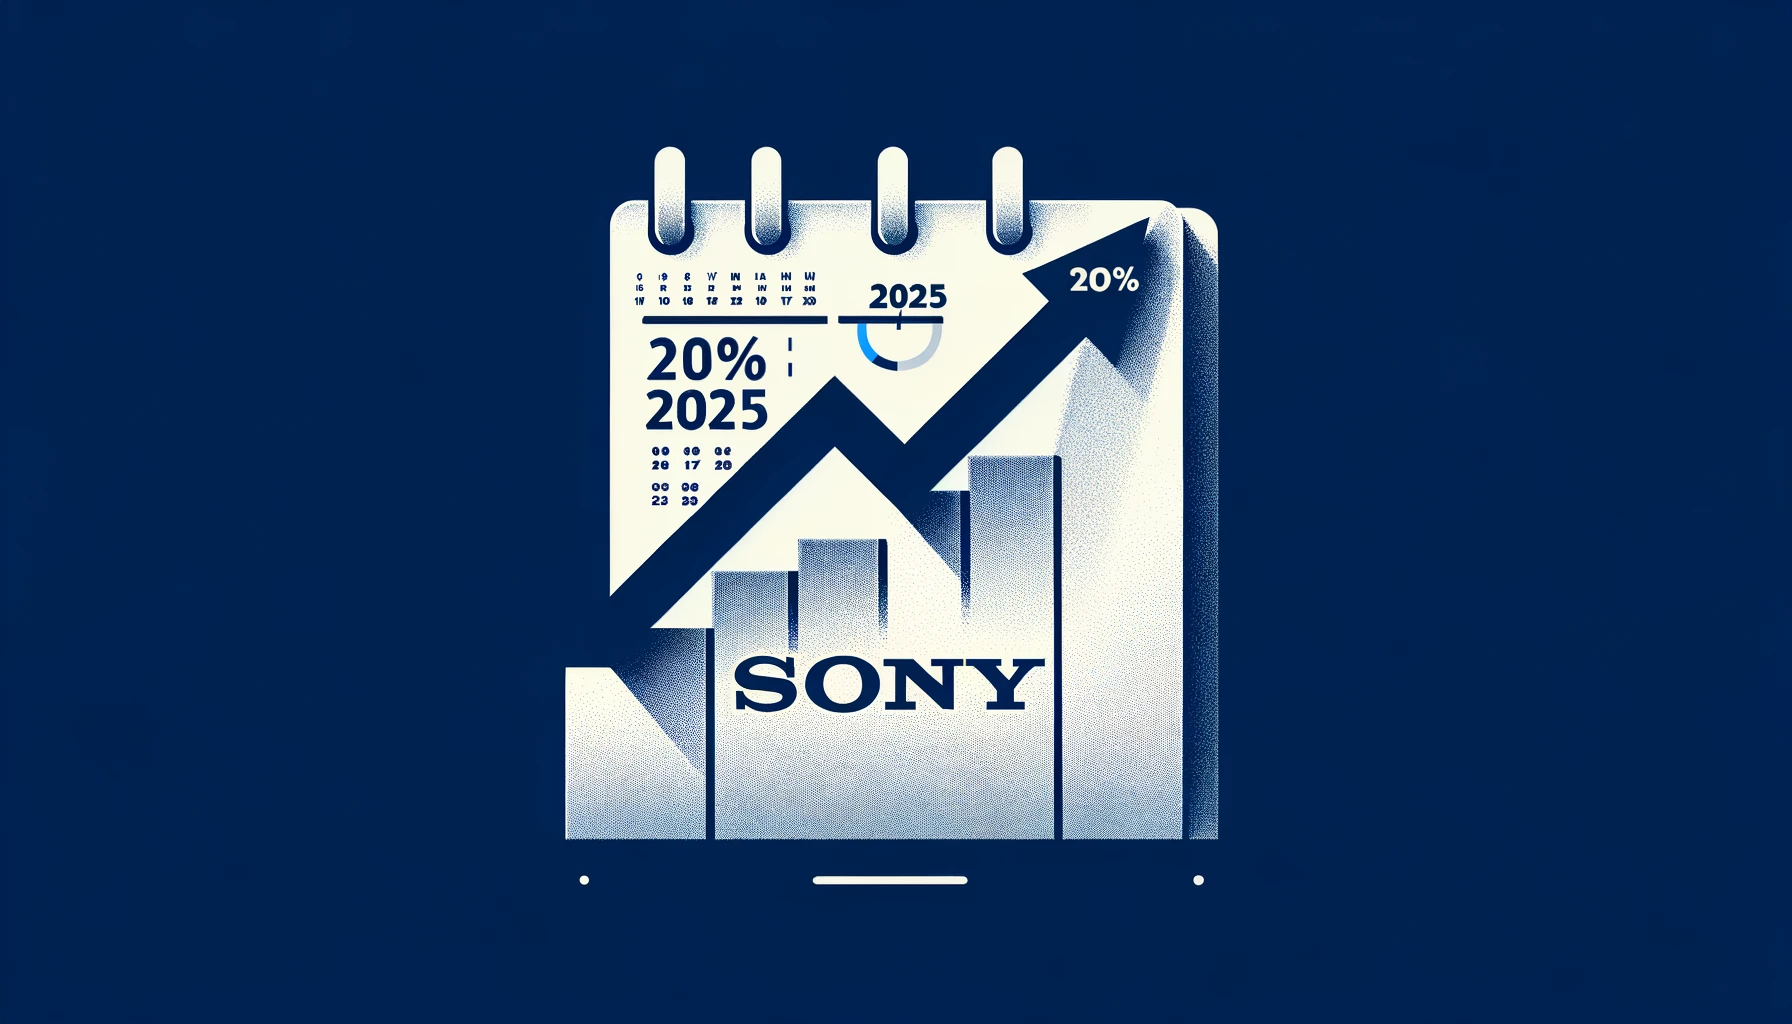 Sony’s Q3 earnings increase by 10%, with plans to list financial division by 2025.